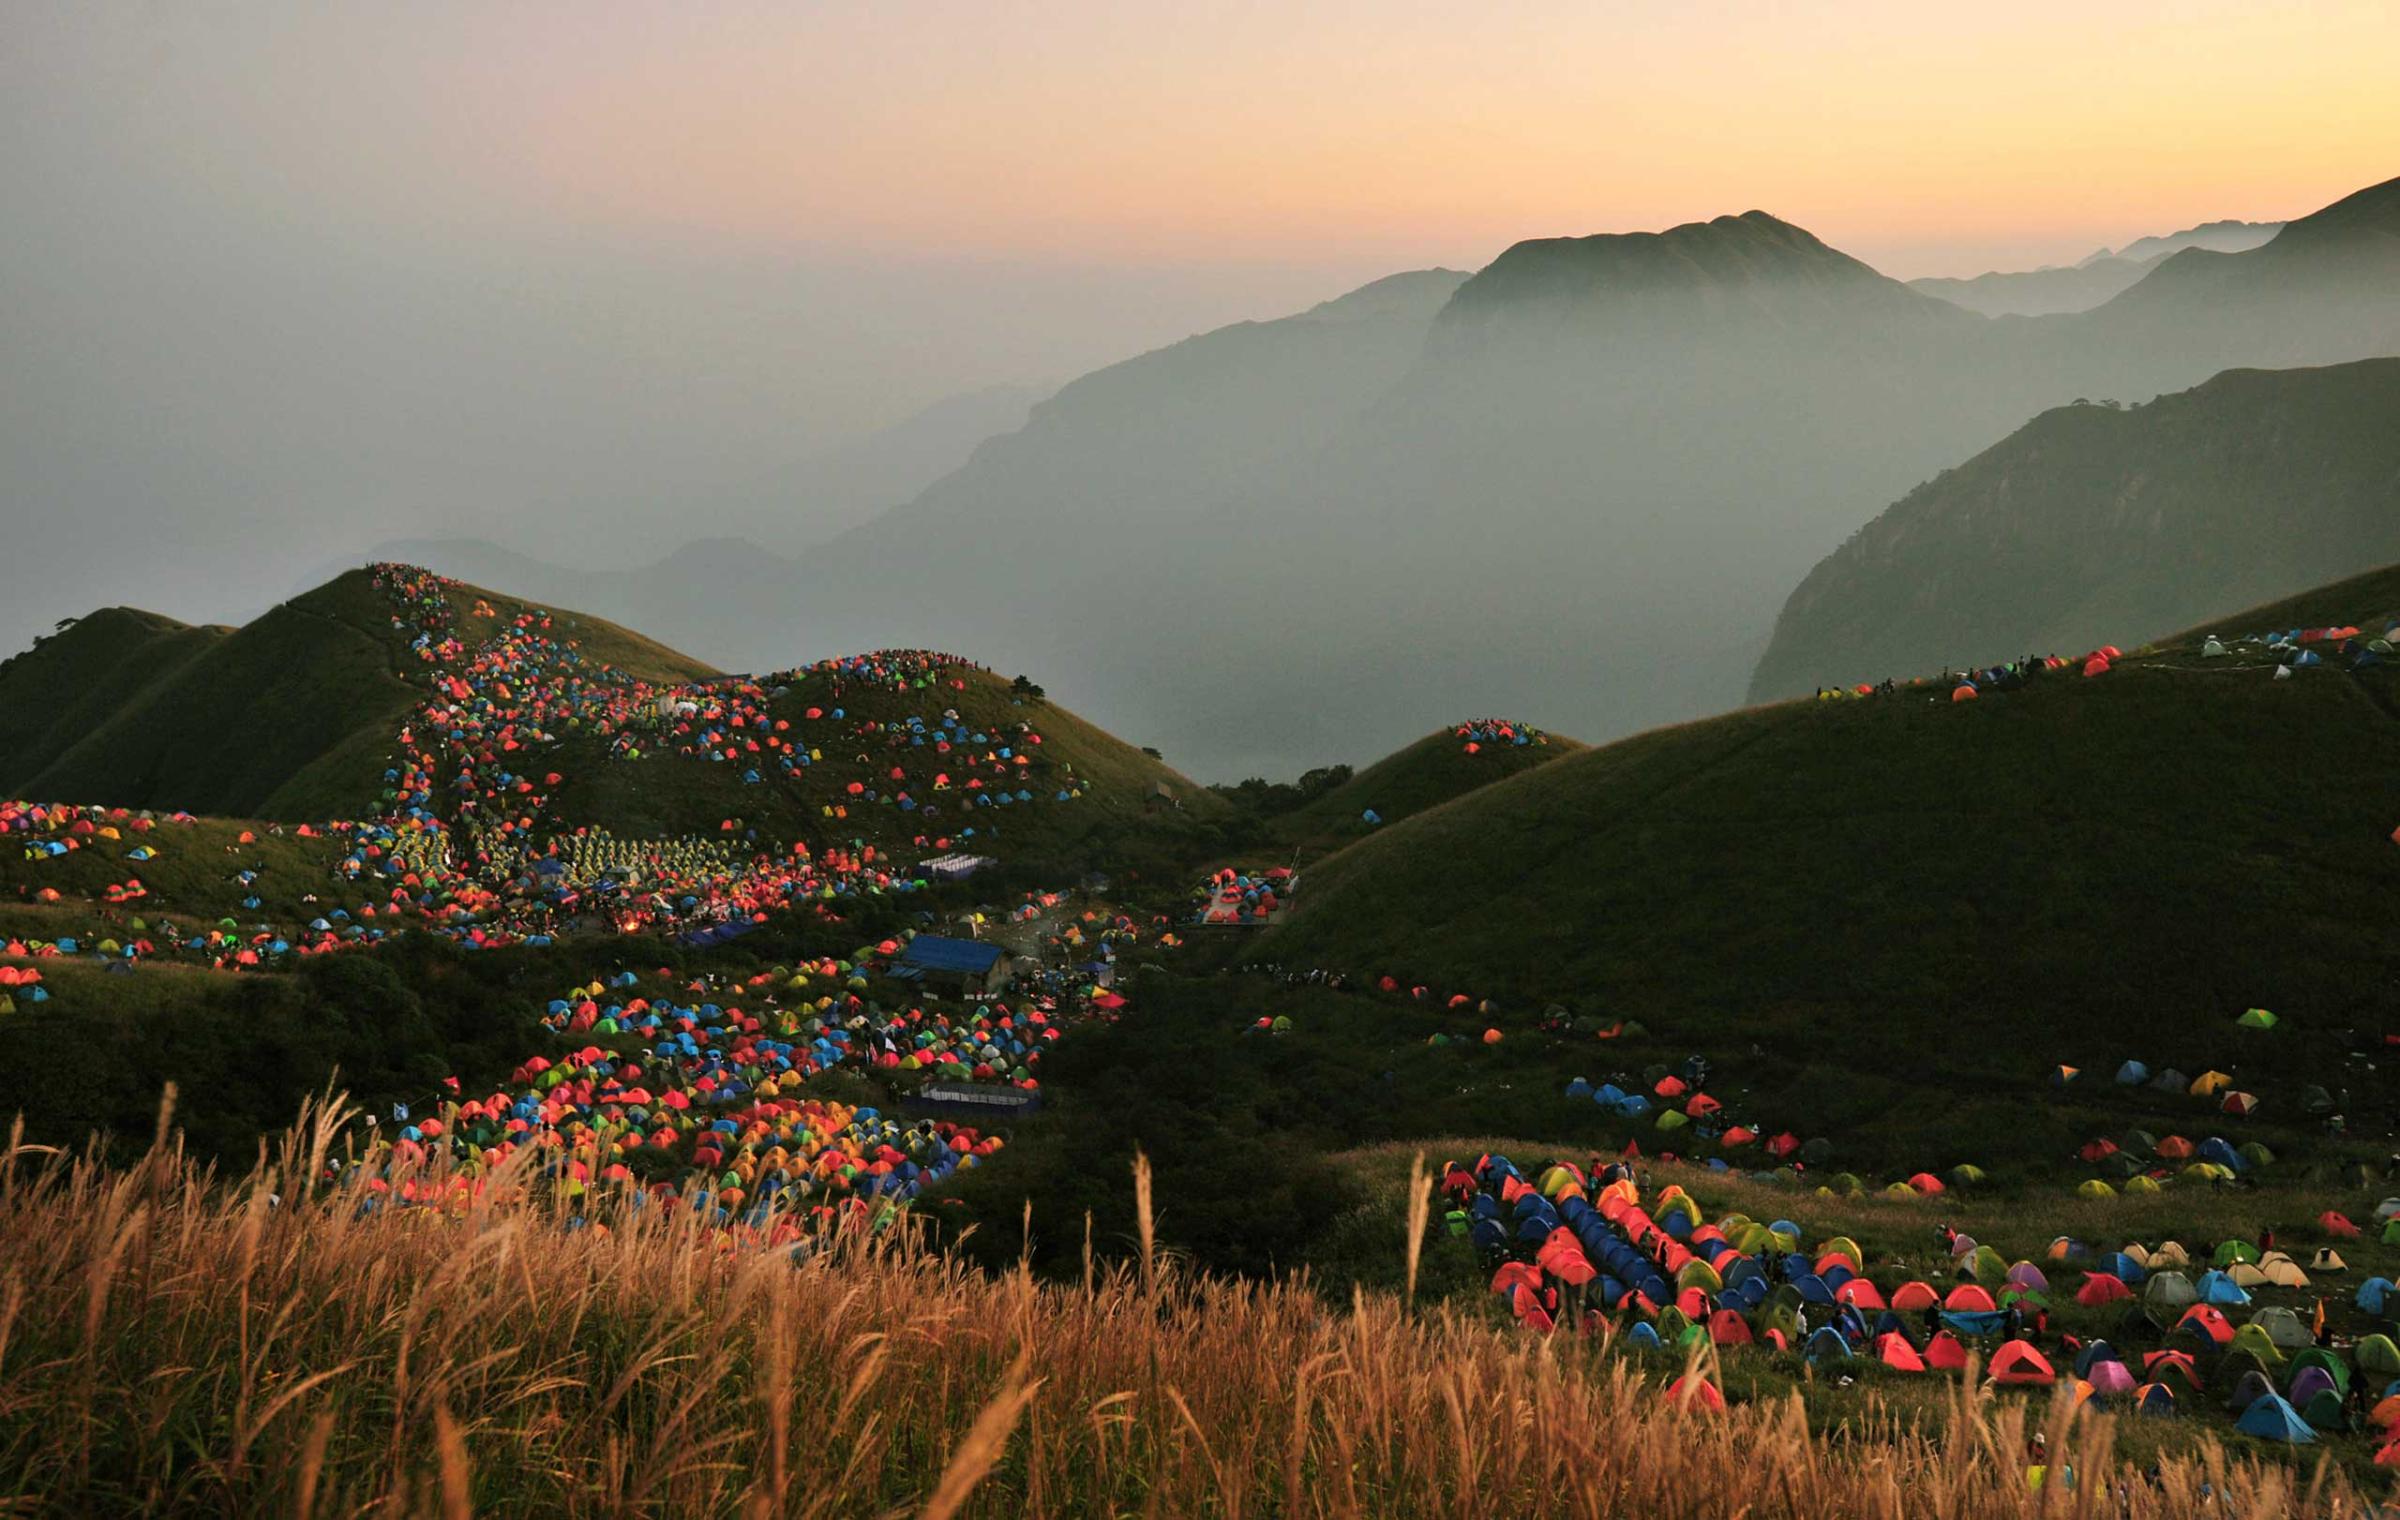 Numerous tents are seen during the 2013 International I Camping Festival in Mount Wugongshan of Pingxiang, Jiangxi province